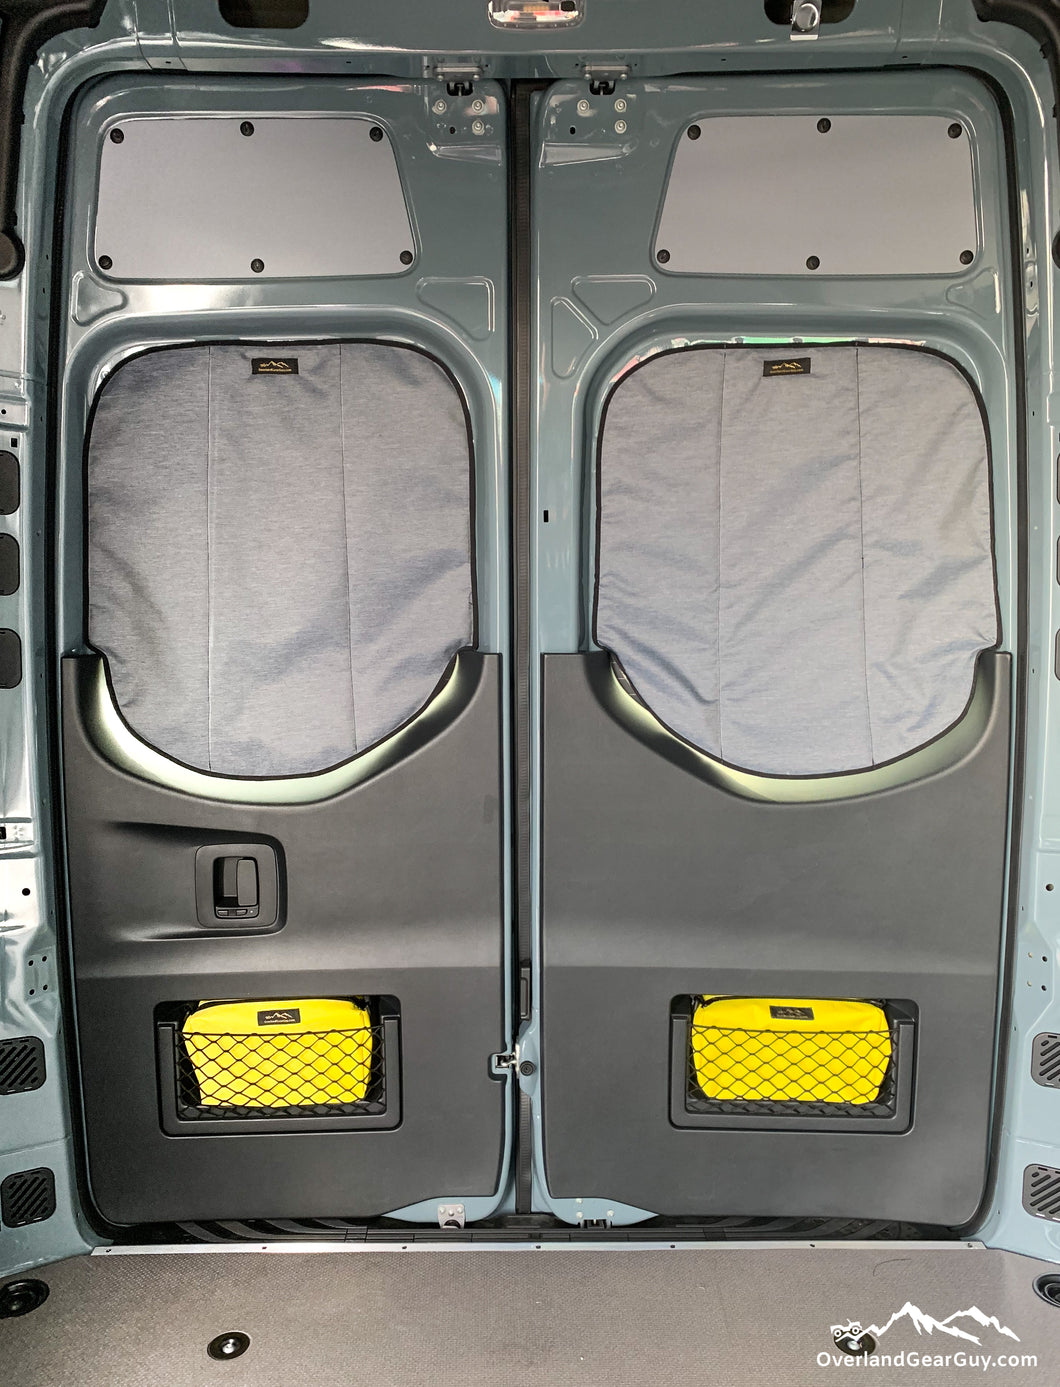 Sprinter Van Magnetic Rear Window Covers by Overland Gear Guy